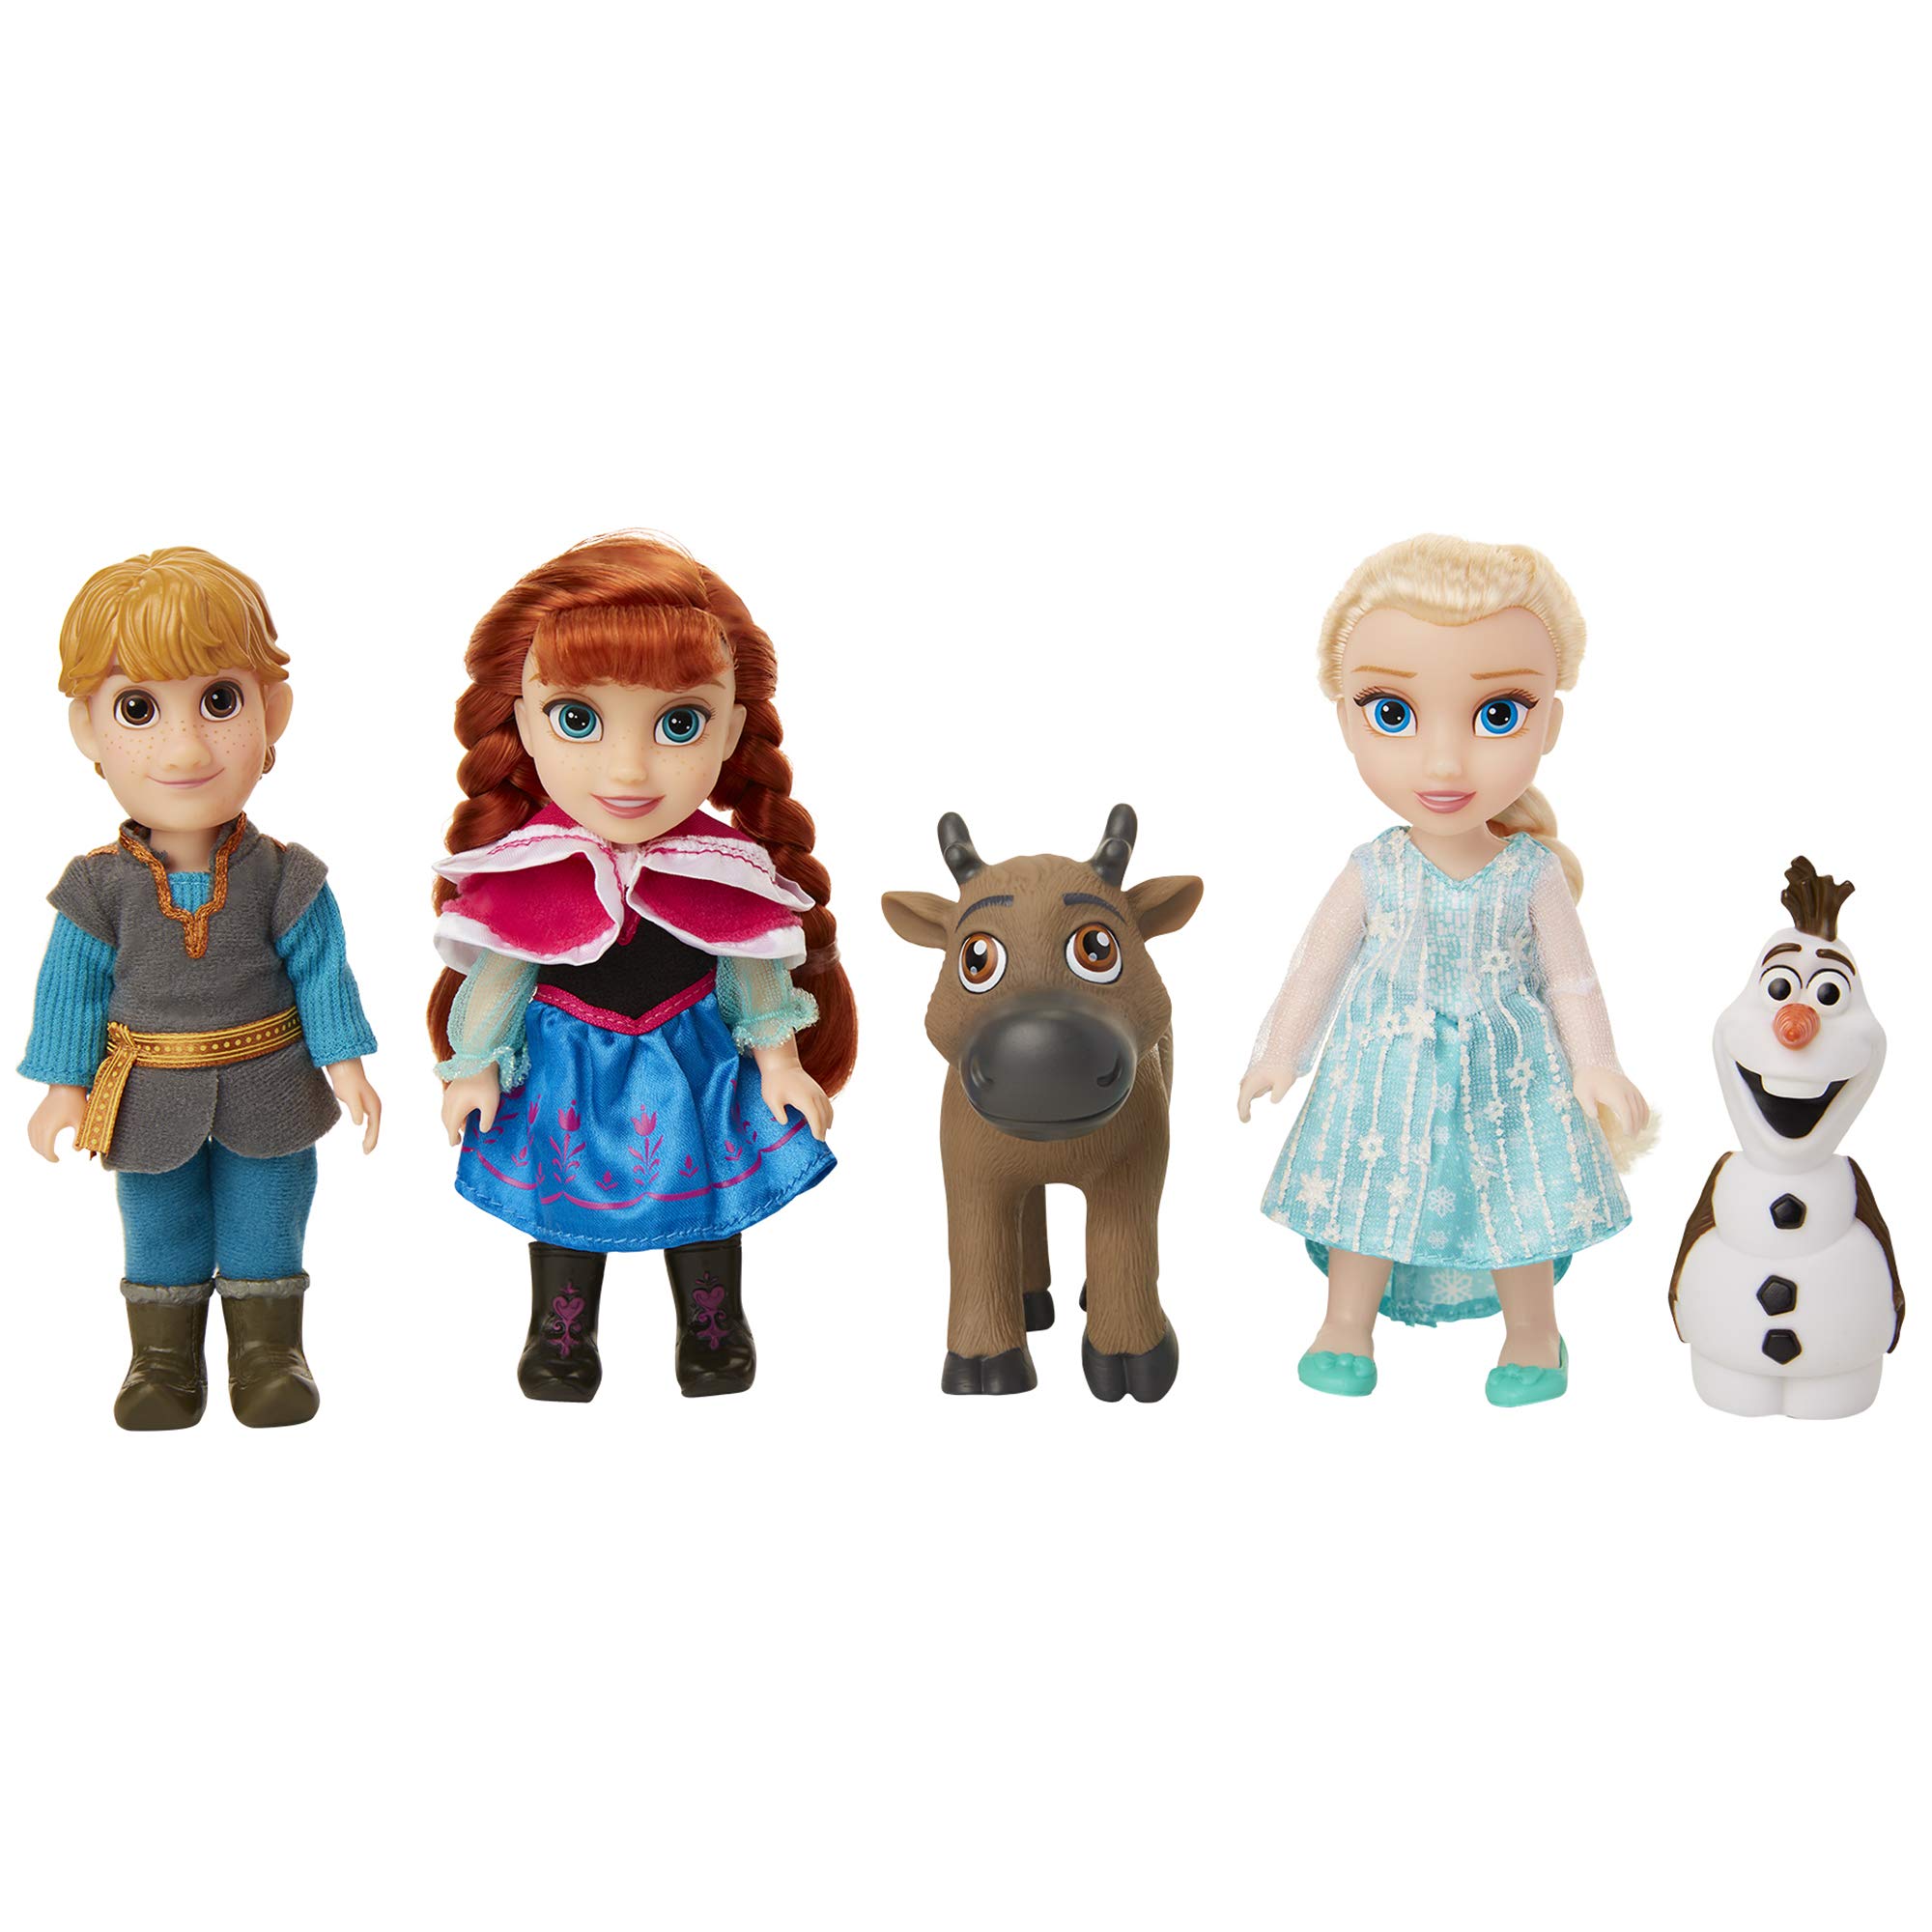 Disney Frozen Deluxe Petite Doll Gift Set - Includes Anna, Elsa, Kristoff, Sven and Olaf! Dolls are Approximately 6 inches Tall - Perfect for Any Frozen Fan!